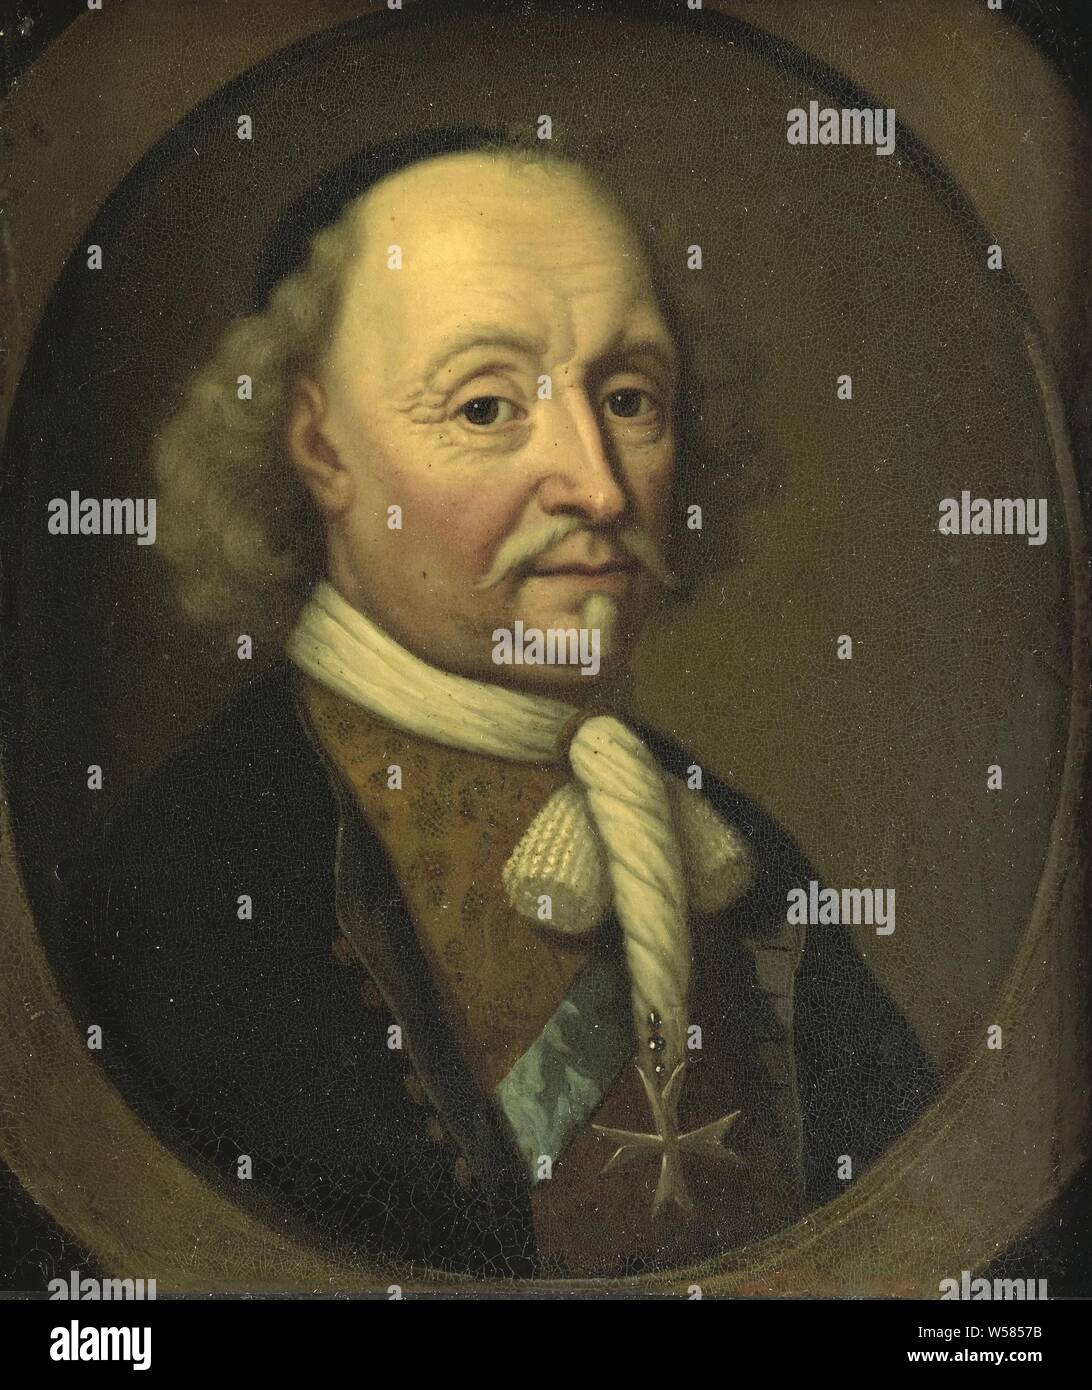 Portrait of Johan Maurits (1604-79), count of Nassau-Siegen and governor of Brazil, Portrait of Johan Maurits of Nassau-Siegen, governor of Brazil. Bust in oval, to the right. He wears the blue ribbon of the Danish Order of the Elephant and has the cross of the Order of St. John around his neck, Johan Maurits count of Nassau-Siegen, Michiel van Musscher, 1670 - 1680, copper (metal), oil paint (paint), h 15.9 cm × w 14 cm d 3.3 cm Stock Photo